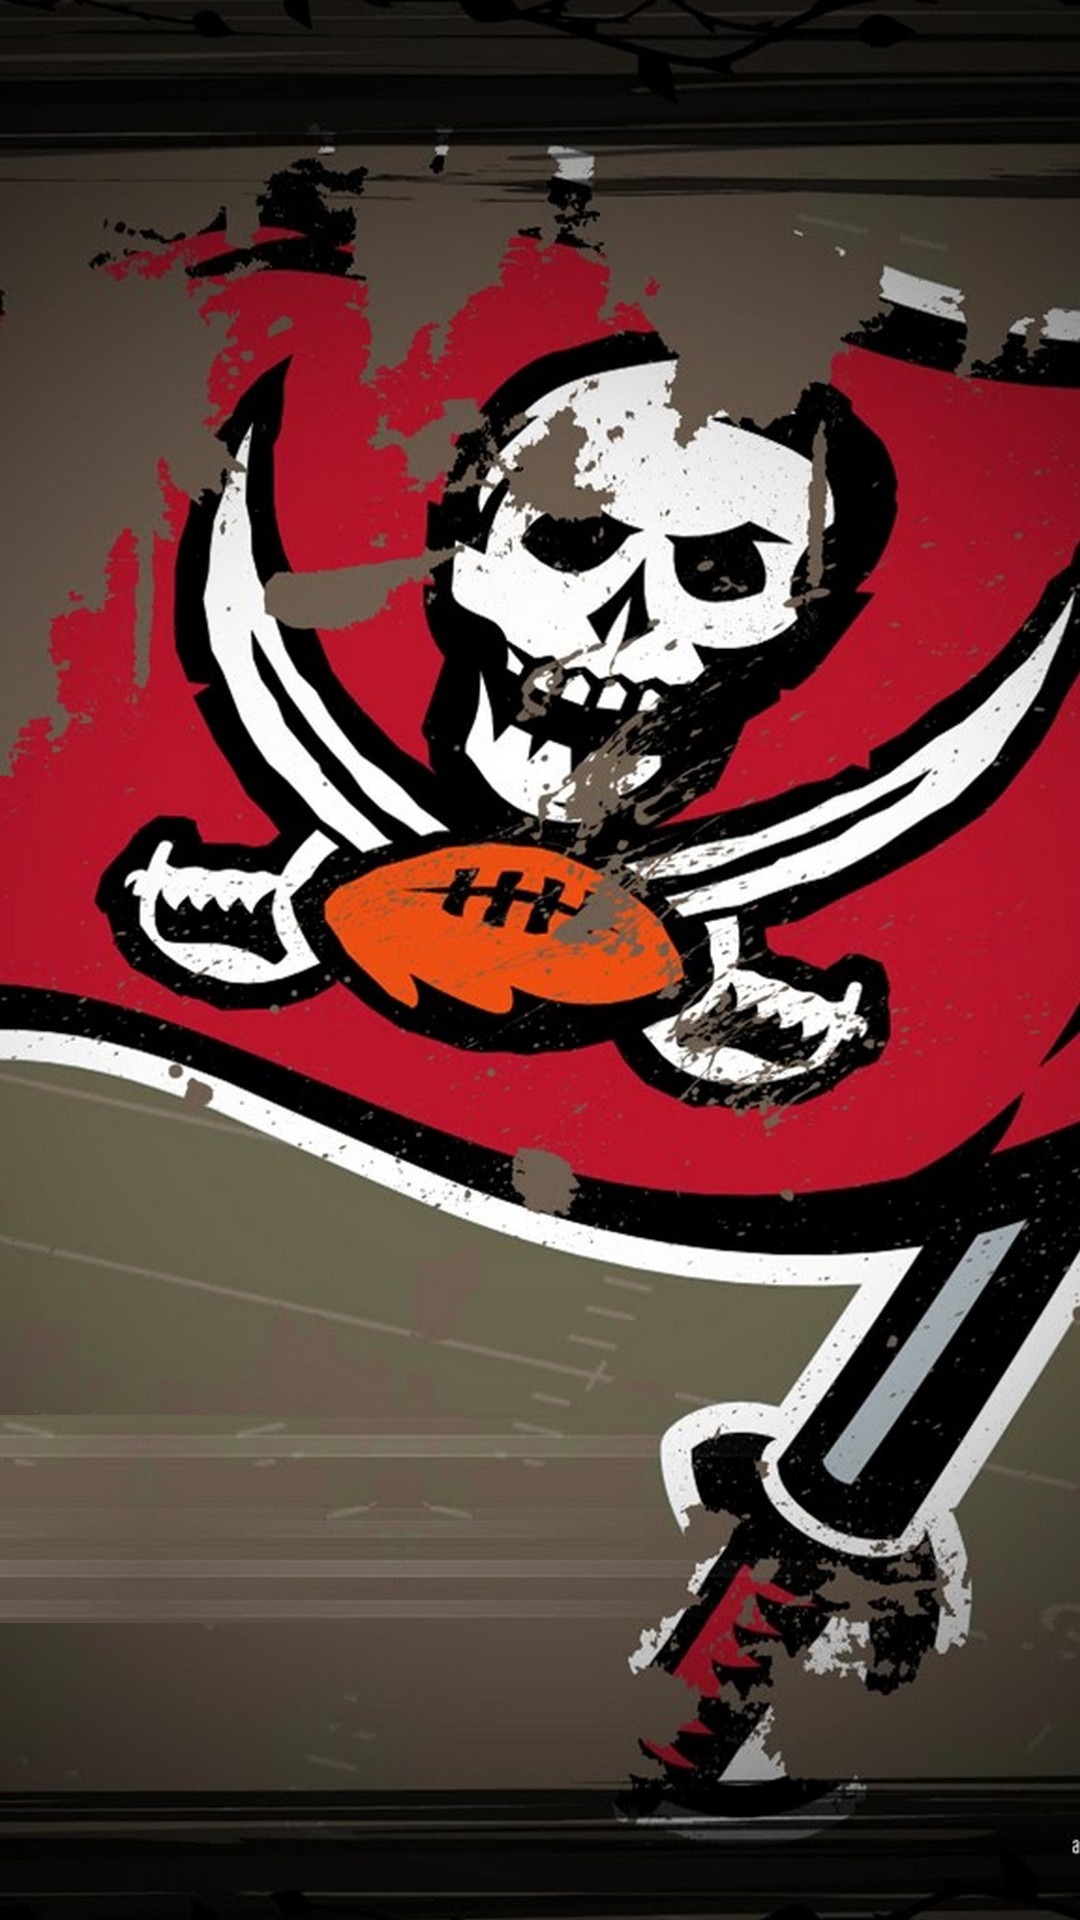 Screensaver iPhone Tampa Bay Buccaneers With high-resolution 1080X1920 pixel. Donwload and set as wallpaper for your iPhone X, iPhone XS home screen backgrounds, XS Max, XR, iPhone8 lock screen wallpaper, iPhone 7, 6, SE, and other mobile devices